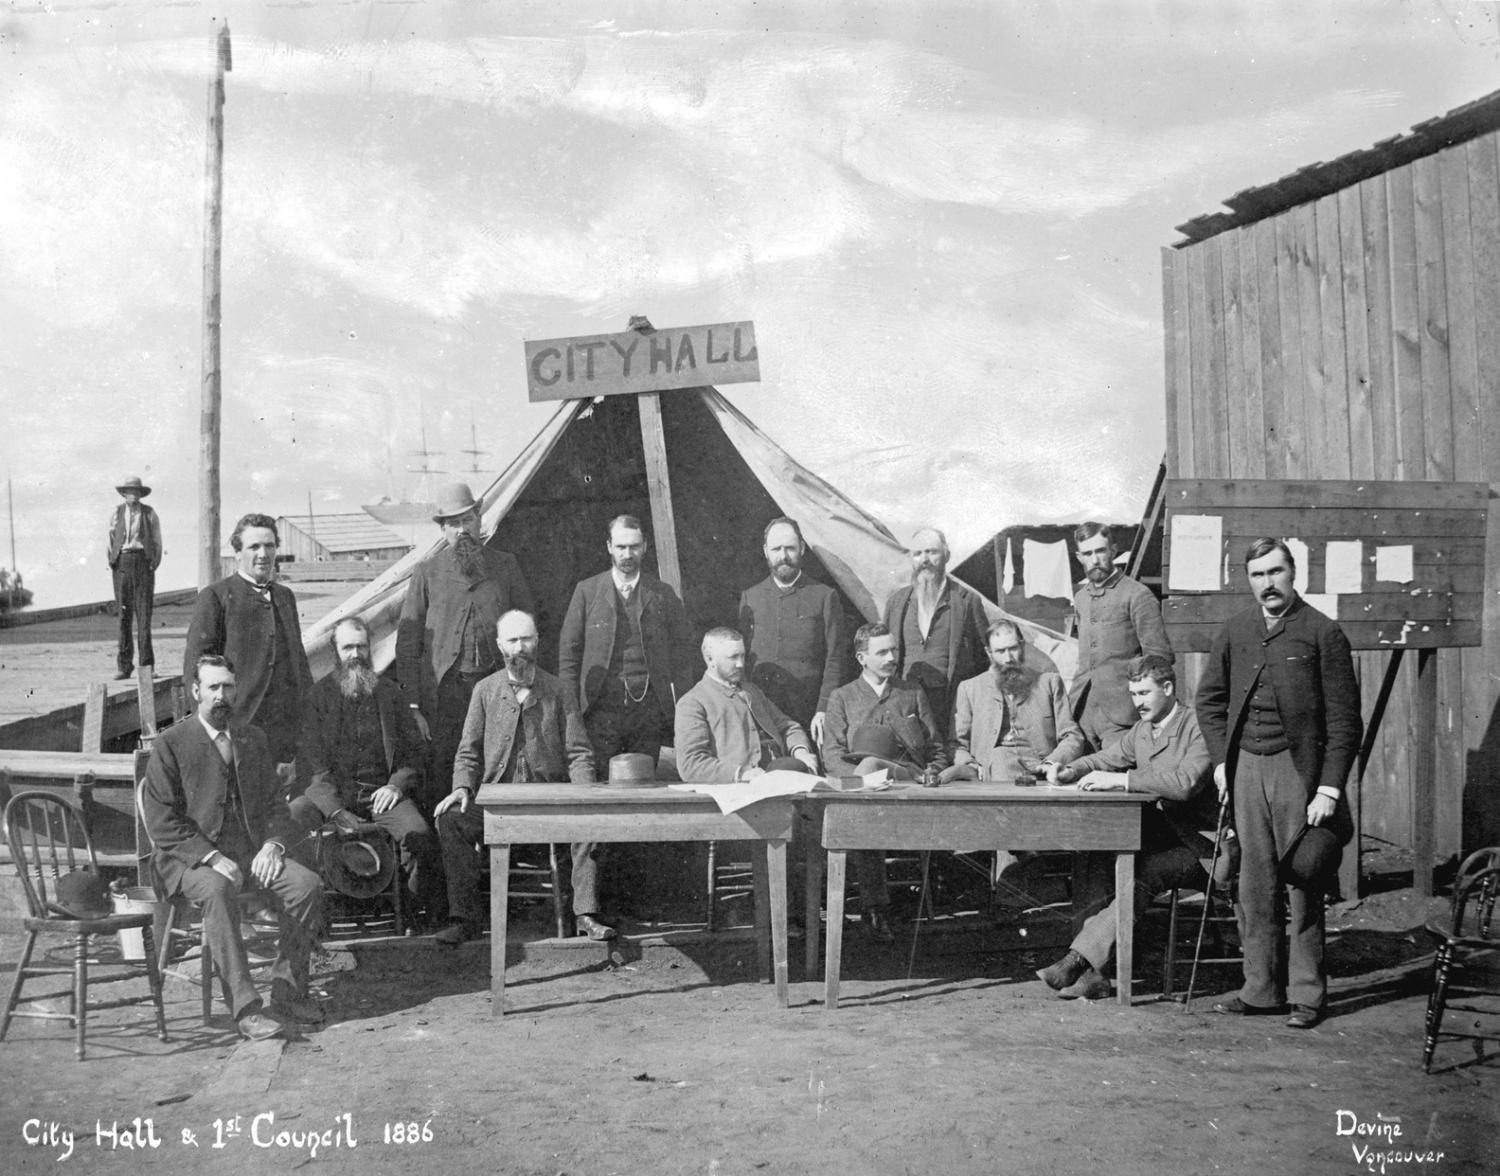 "Photograph shows City Council members and officials standing in front of a tent with the sign "City Hall", after the fire of 1886." 